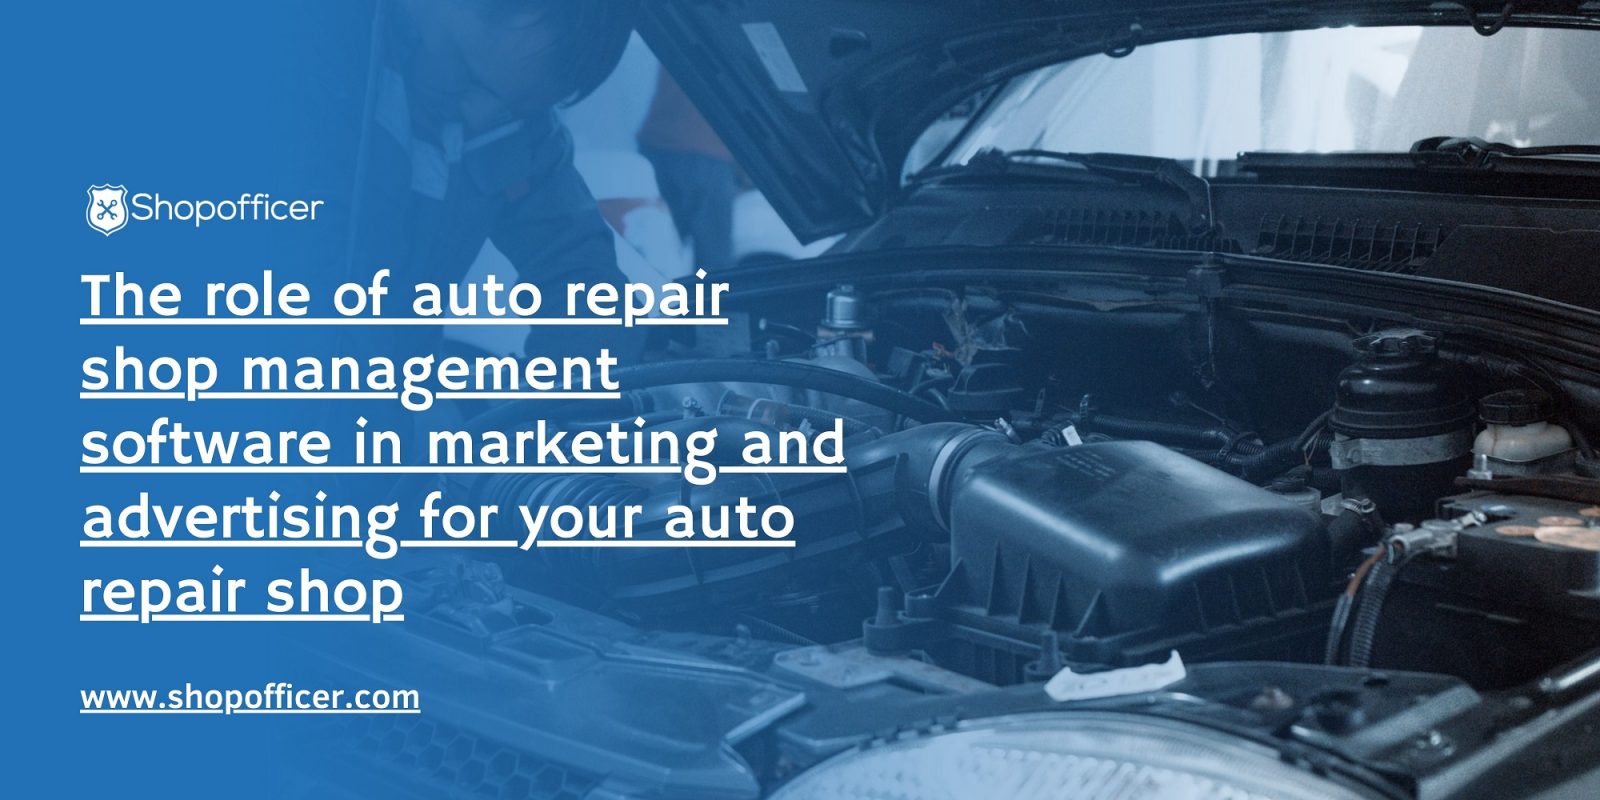 The role of auto repair shop management software in marketing and advertising for your auto repair shop